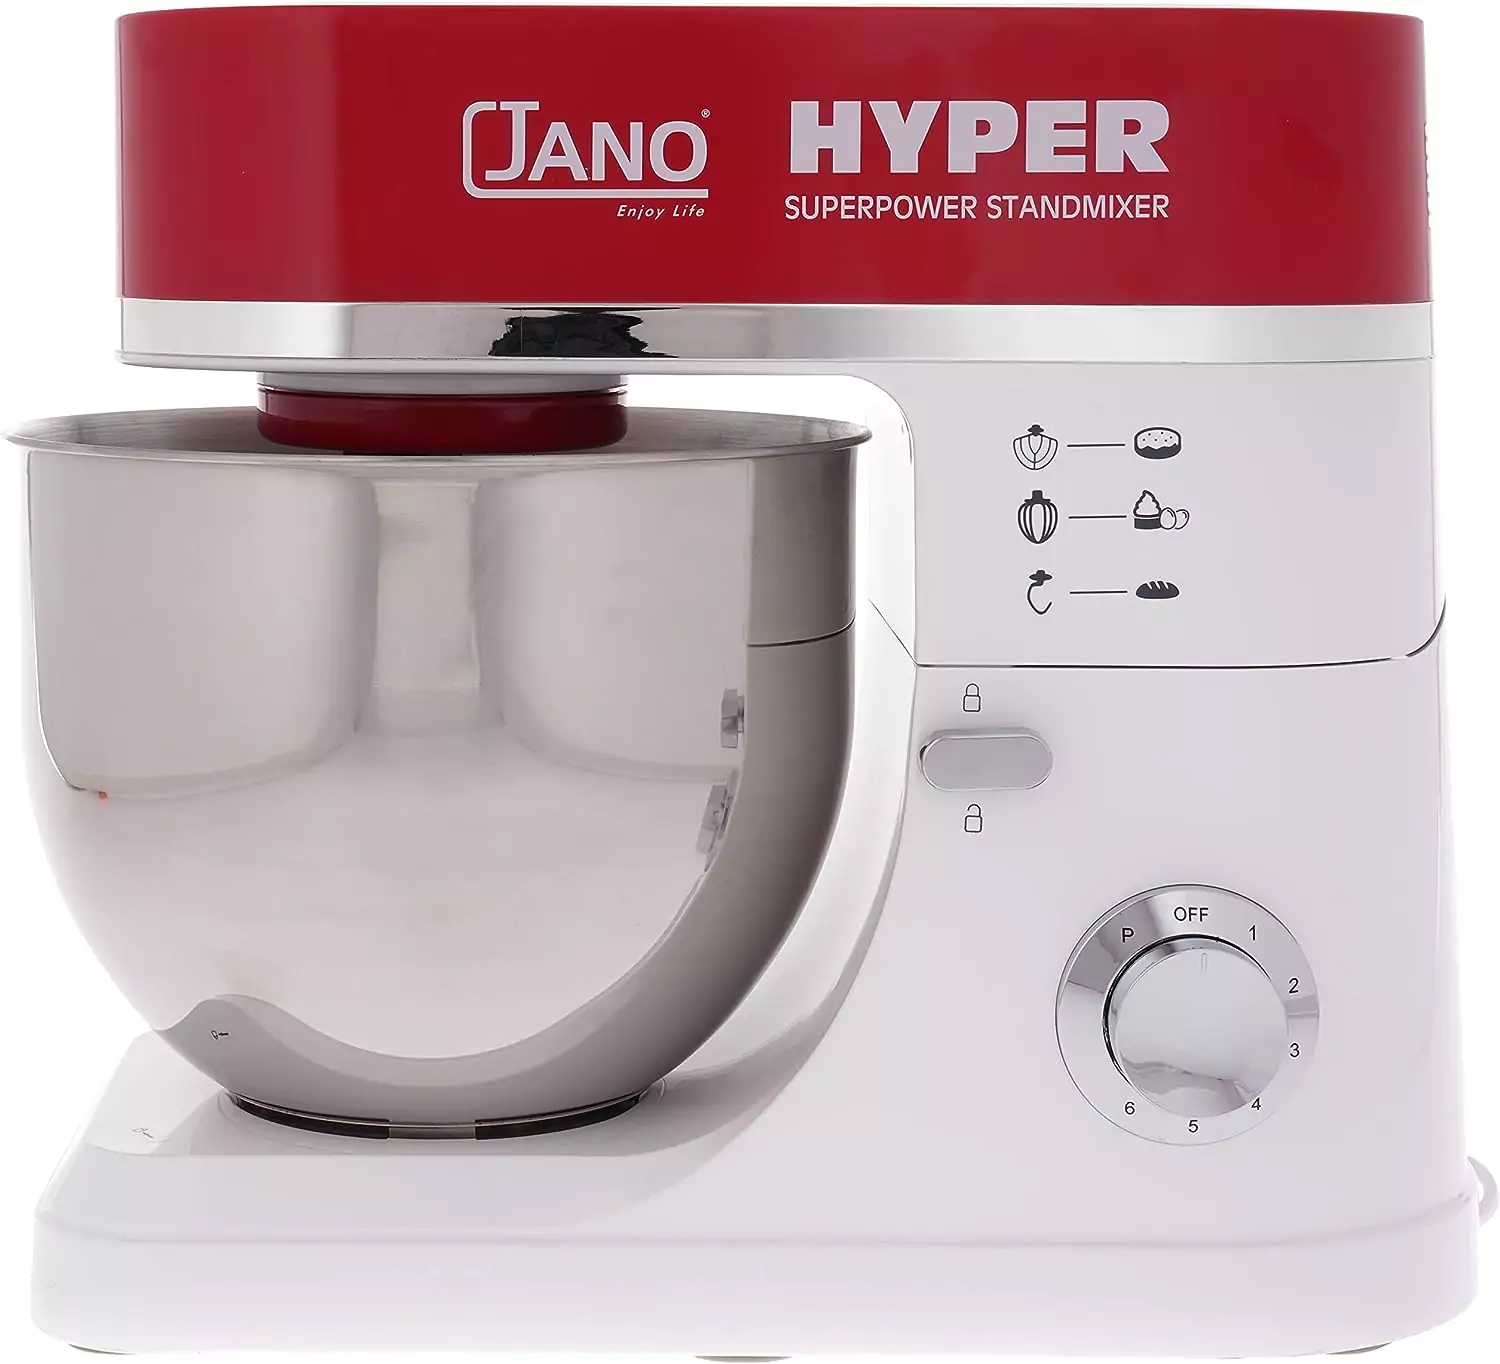 HYPER Stand Mixer, JANO from Al Saif Company, large size 7 liters - JN1210